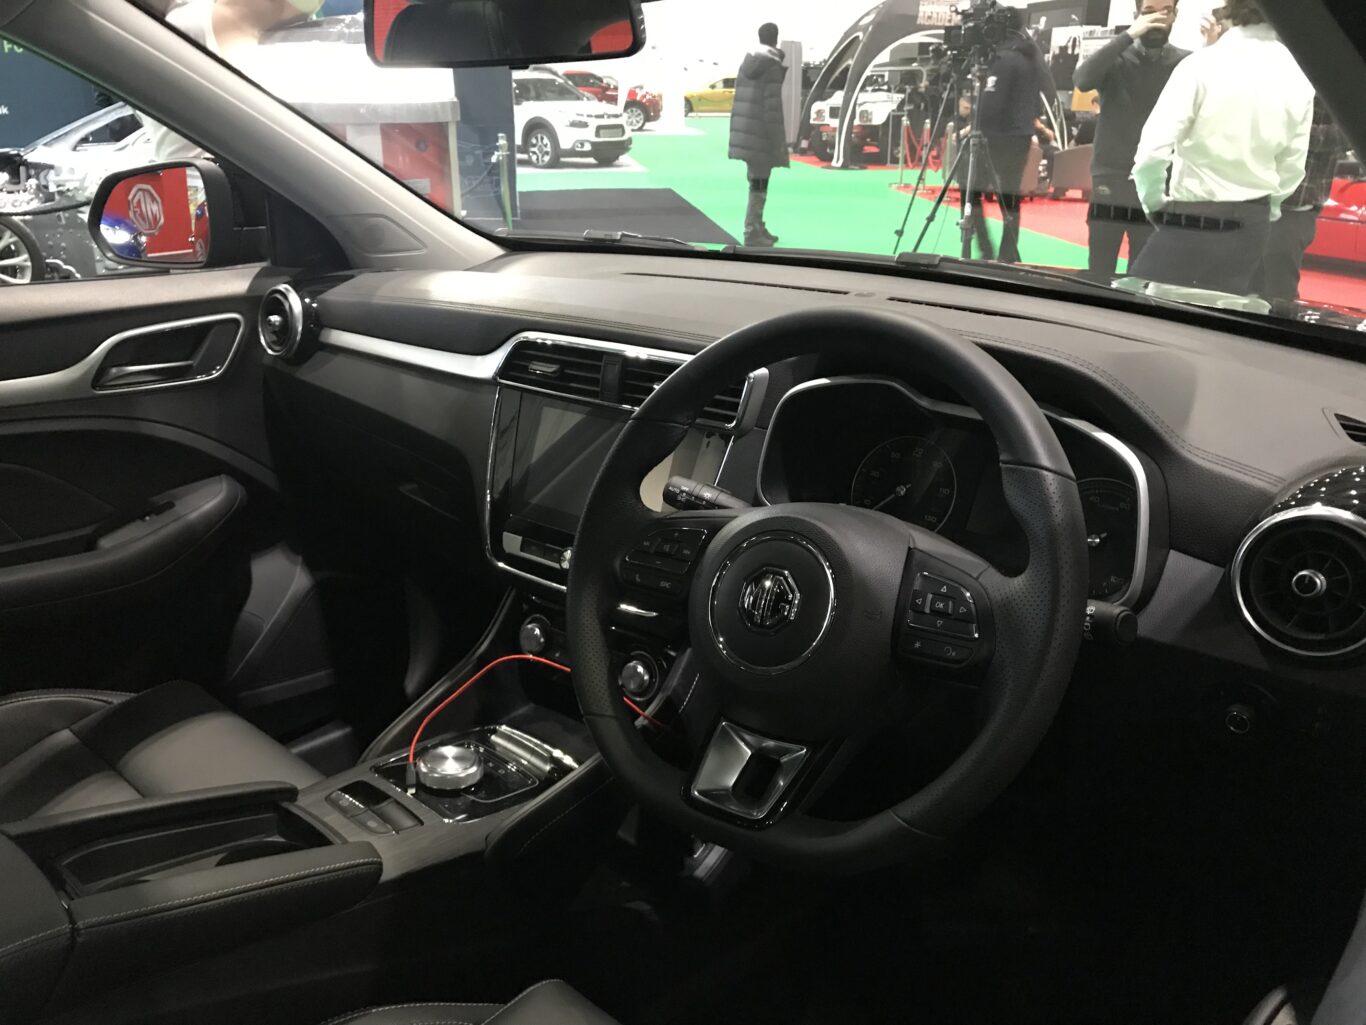 The interior is largely similar to the regular ZS